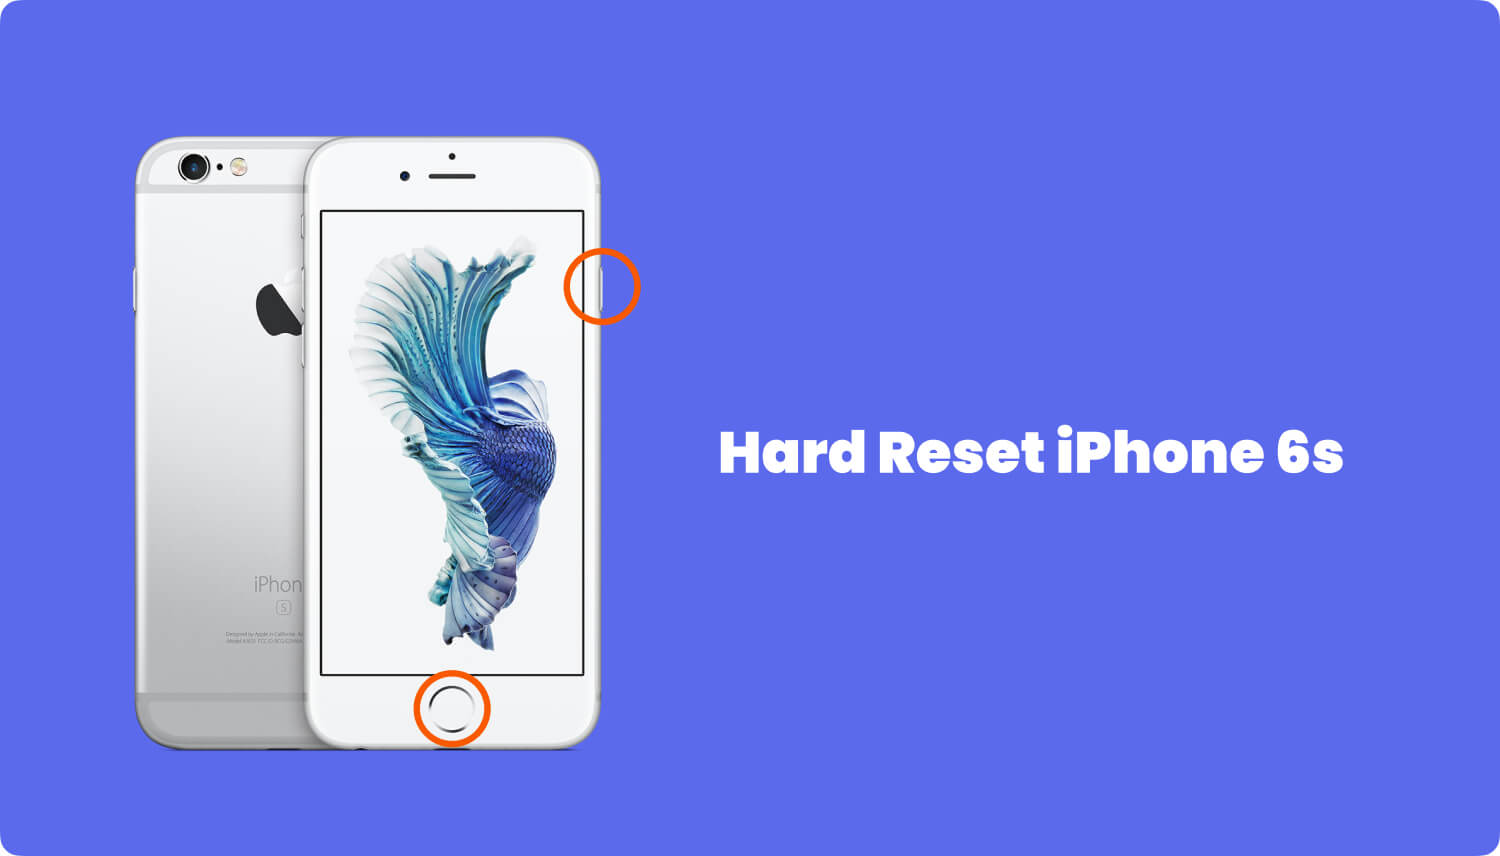 Fix iPhone Red Screen Issue: Hard Reset iPhone